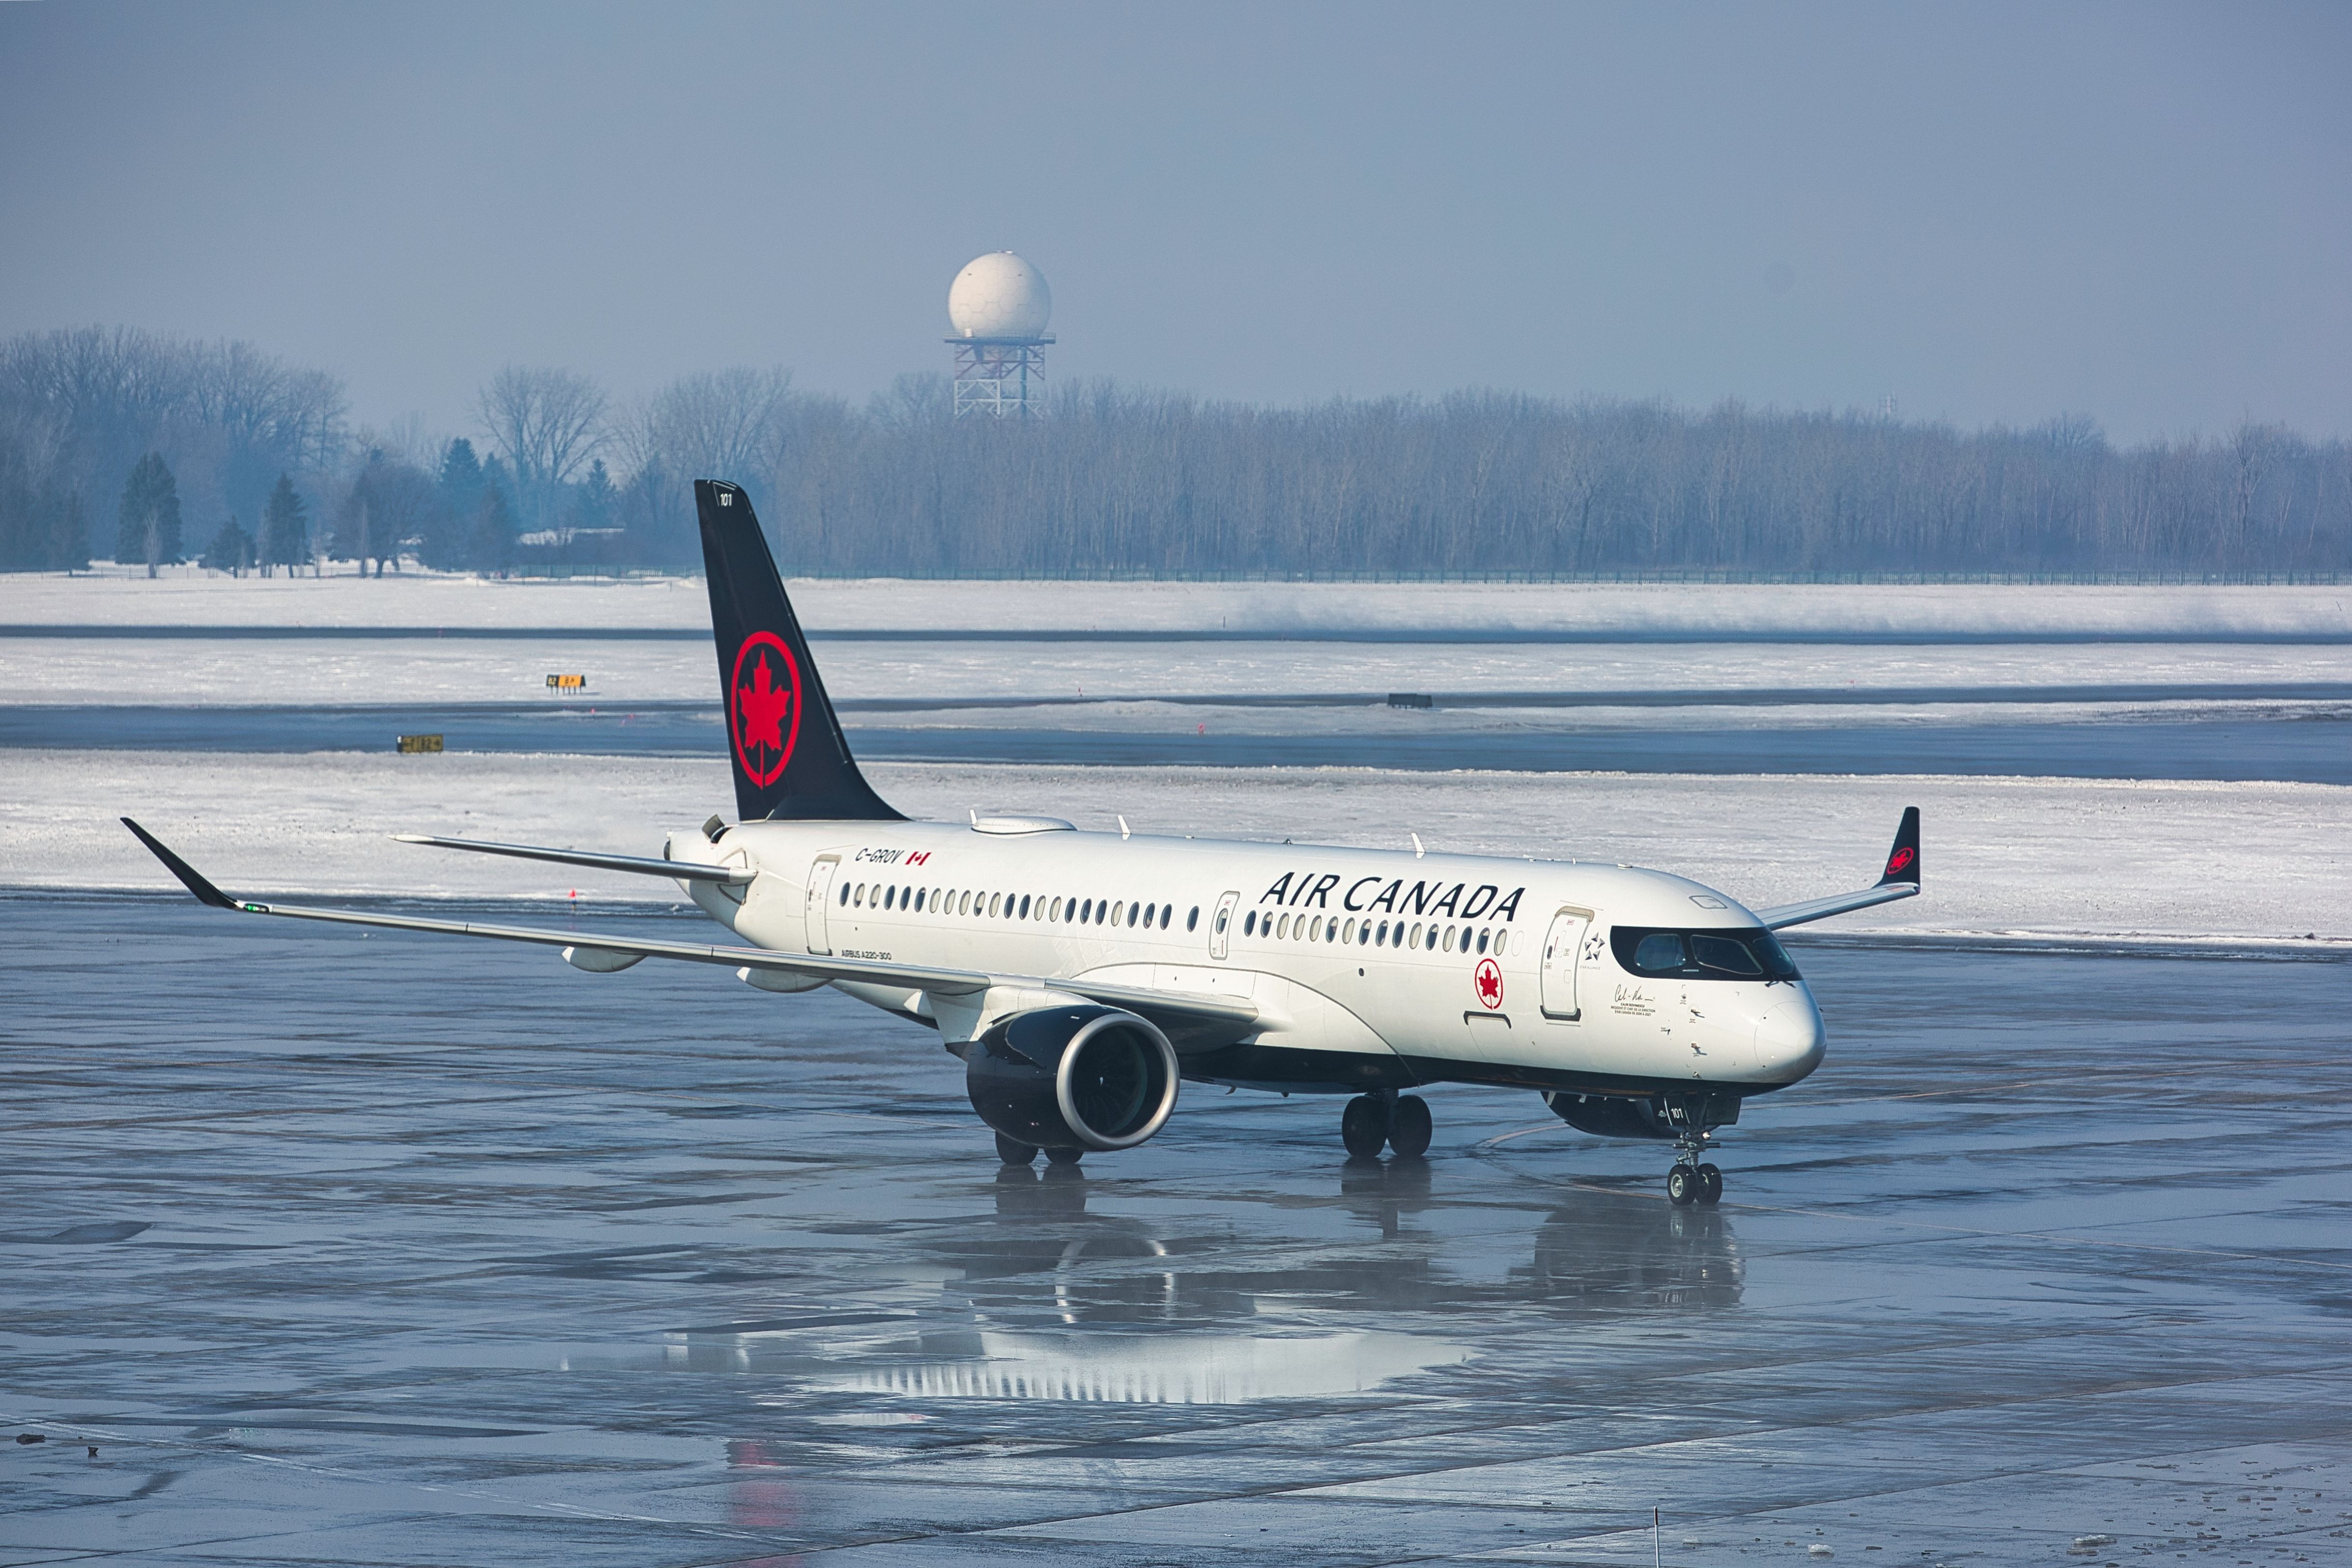 Air Canada jet taxiing at Montreal airport